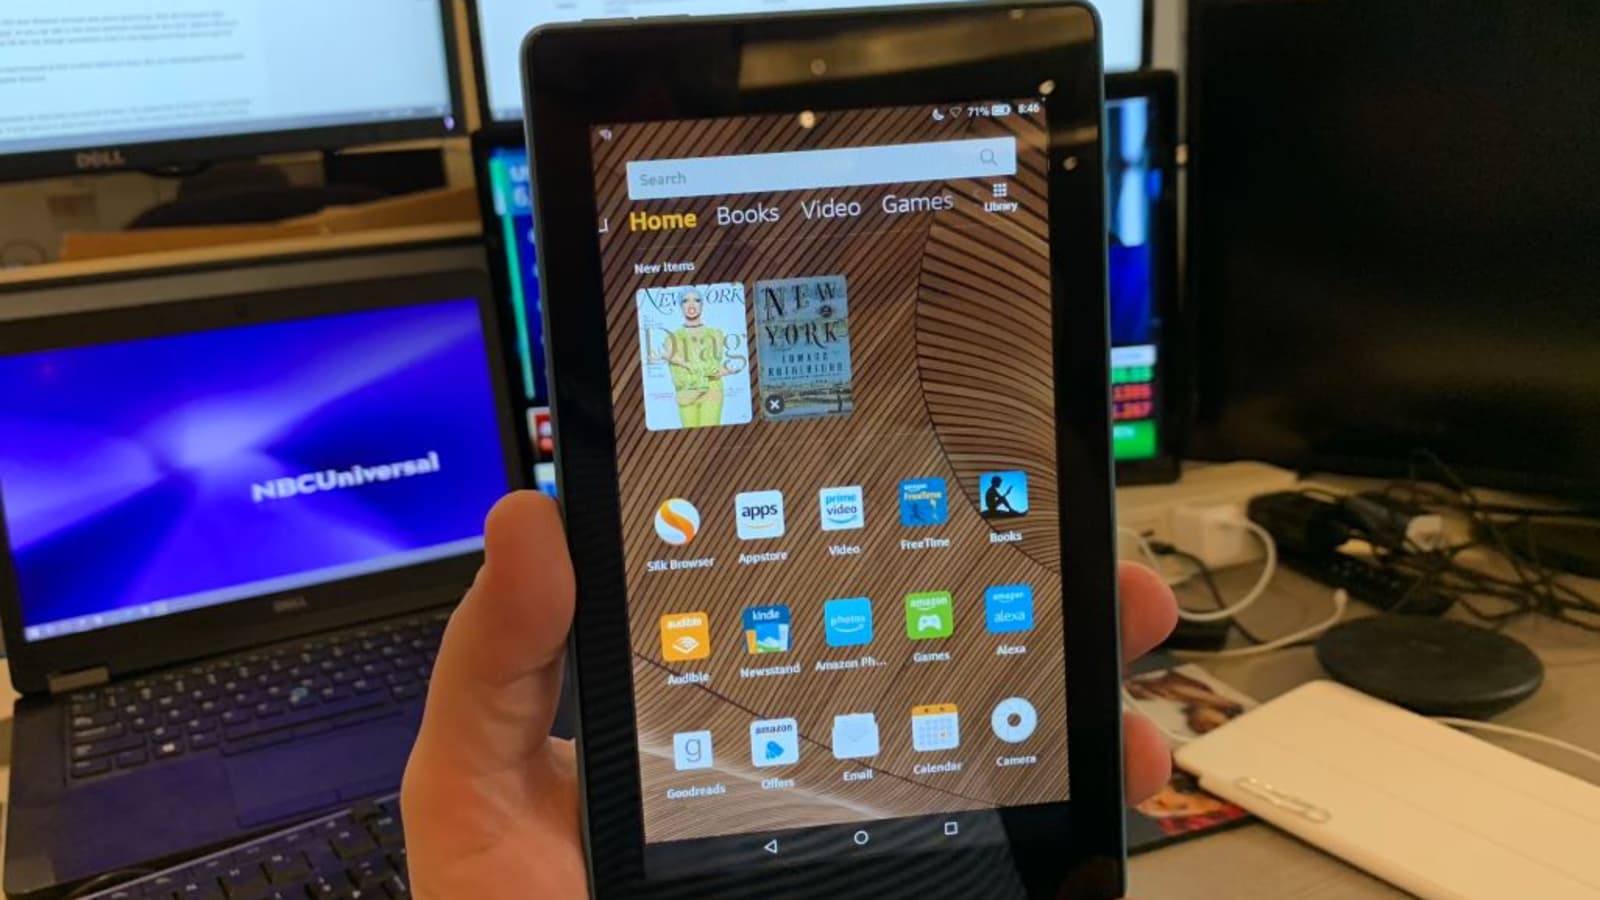 Amazon Fire 7 2019 Tablet Review Skip It Buy Fire Hd8 Instead - can you get roblox on amazon fire 7